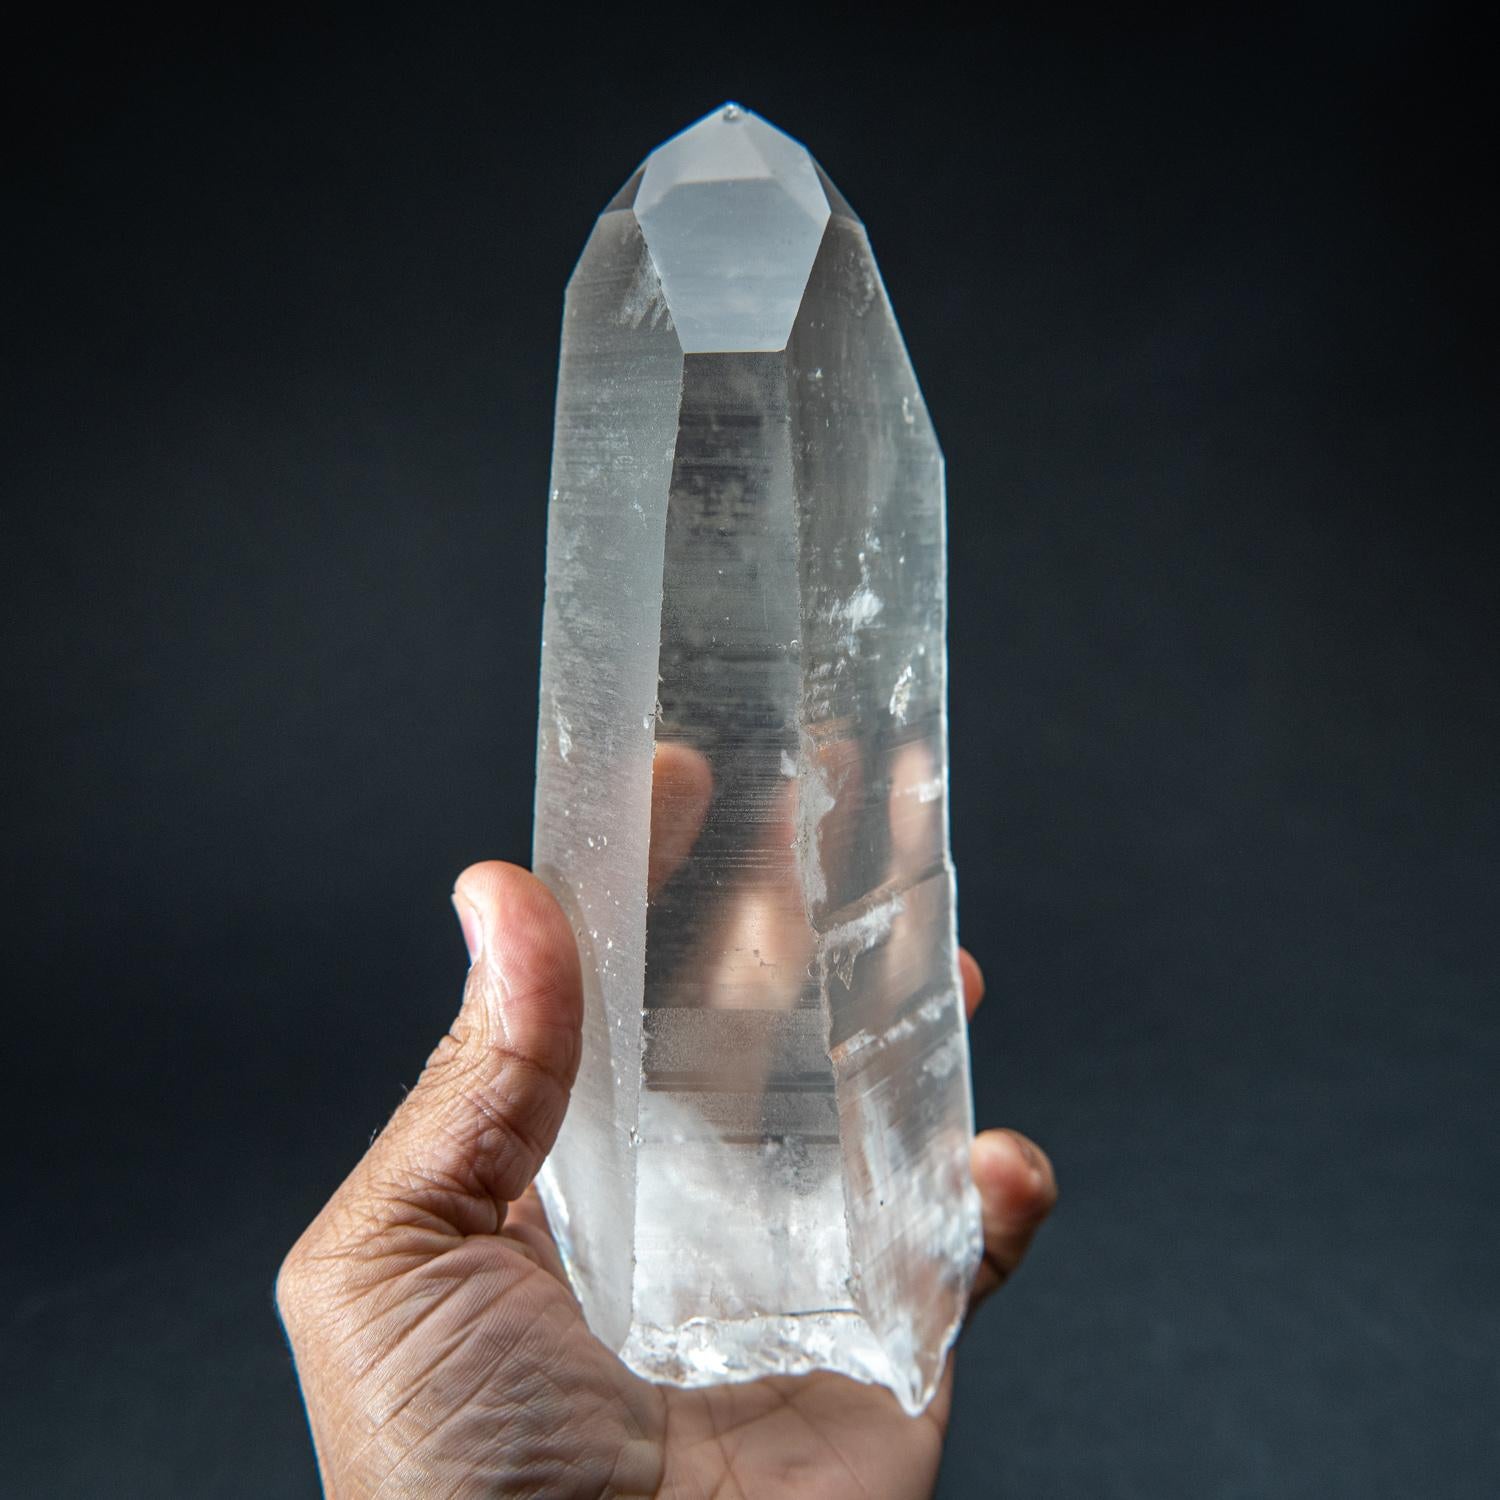 This natural 2.75 lb Brazilian Lemurian Quartz is a large single specimen, featuring transparency and an intact termination. No damage is present, and the crystal is unpolished. Clear Quartz is famously known as the 